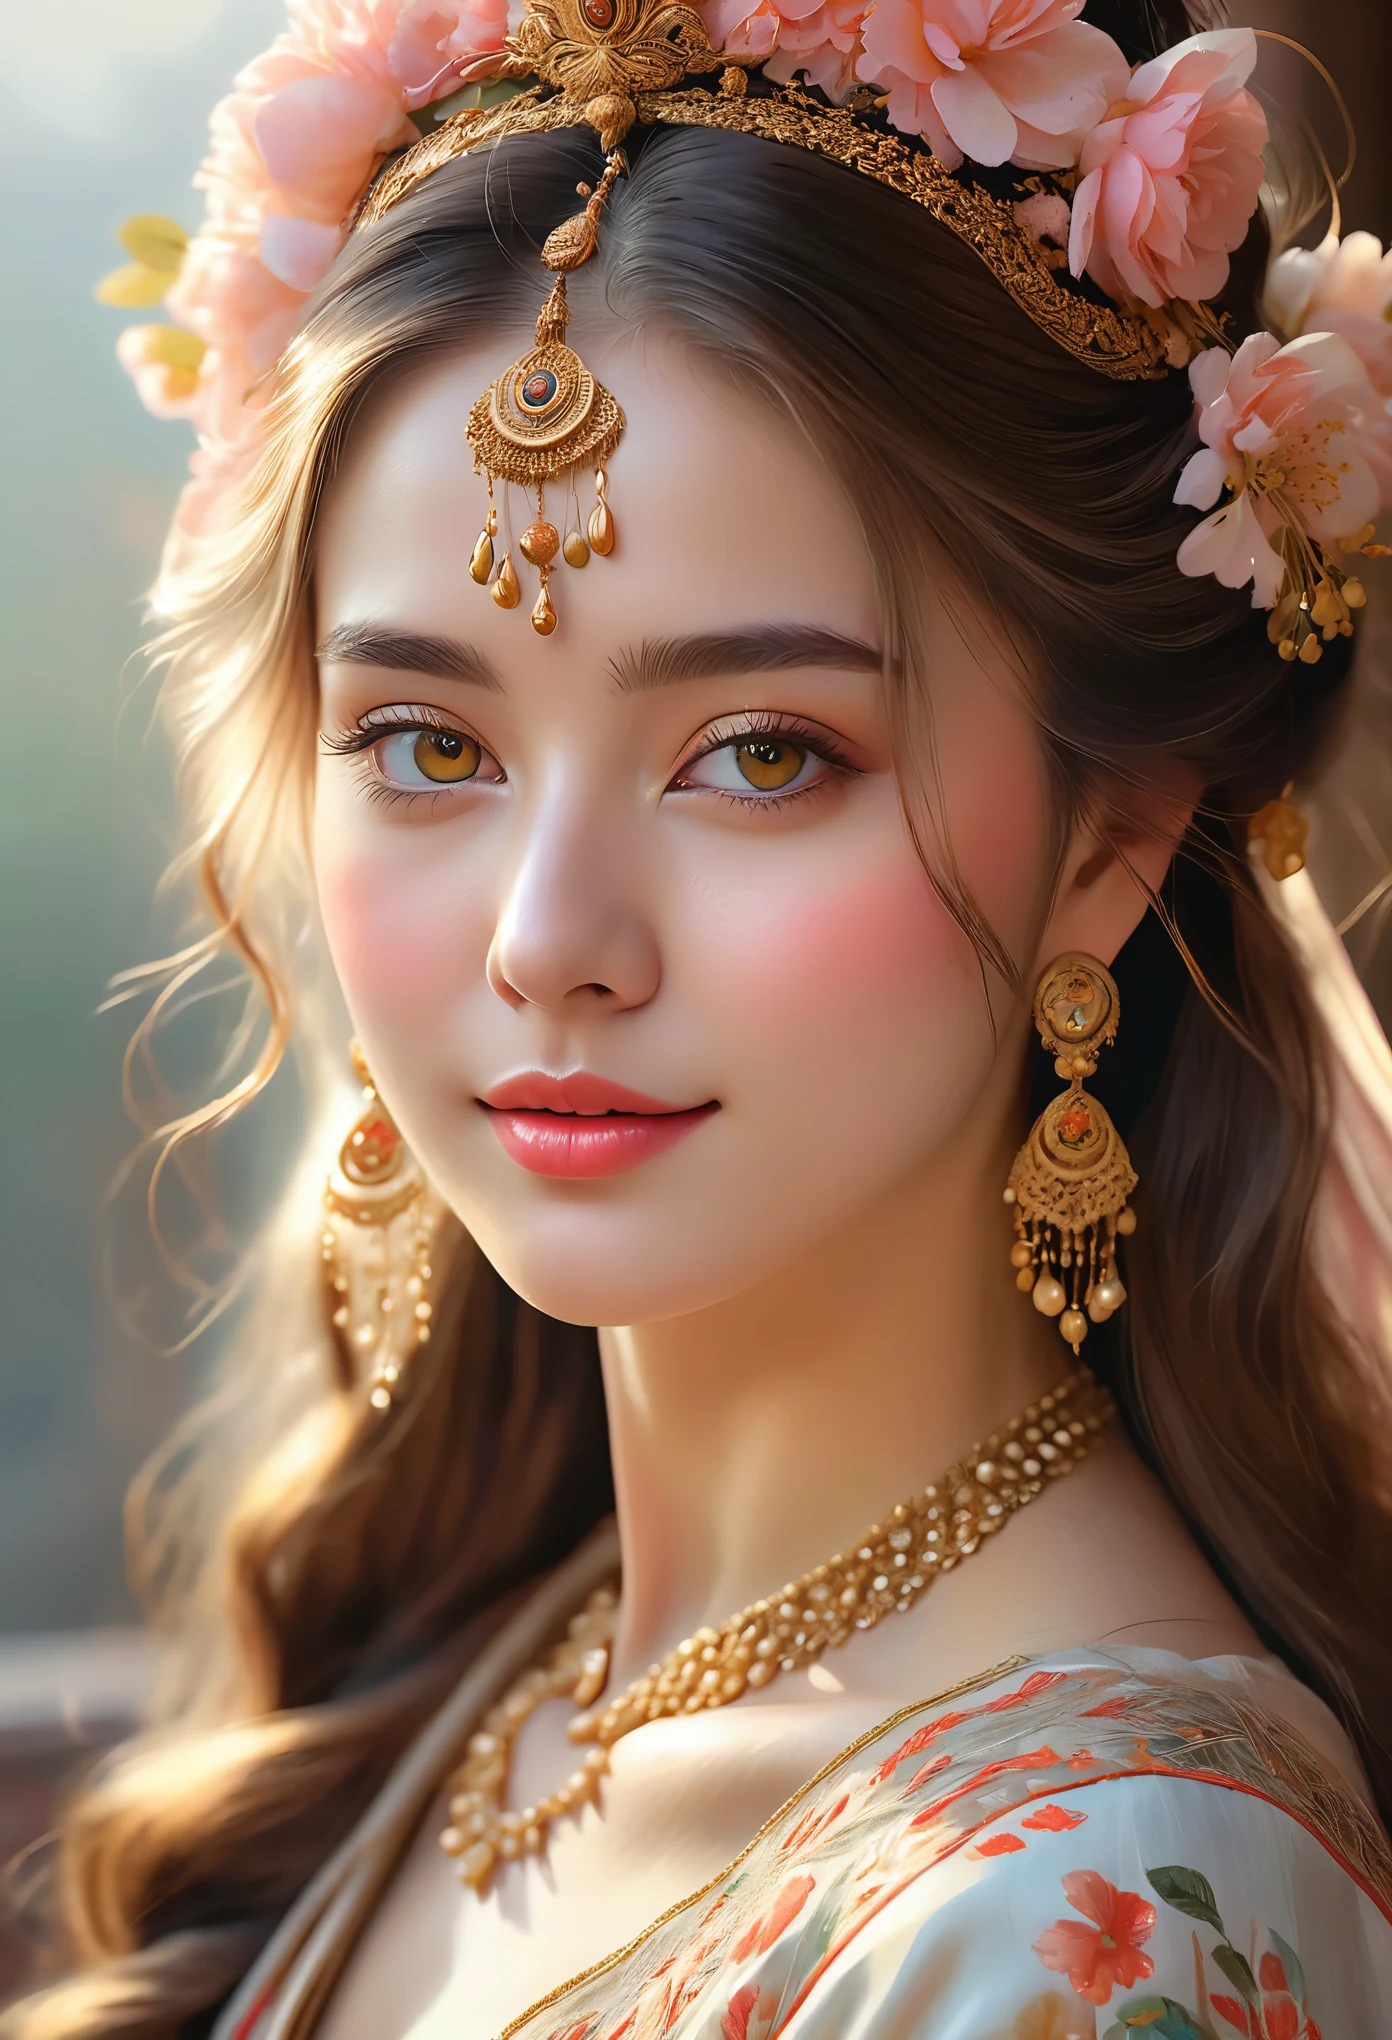 (high quality, 4k, realistic), (oil painting), (vivid colors), (fine brushstrokes), (soft lighting), (subtle expression), (traditional clothing), (ornate headpiece), (beautiful eyes), (rosy cheeks), (long flowing hair), (delicate features), (slight smile), (natural background), (golden light), (captivating gaze), (graceful pose), (enhanced contrast), (texture details), (focused attention on face), (subtle hints of traditional patterns), (subdued color palette), (sublime beauty), (nostalgic atmosphere), (ethereal quality), (dreamlike ambiance), (elegant composition), (meticulous attention to detail), (timeless elegance), (emotional depth), (mesmerizing presence), (intense but gentle aura), (engaging and alluring), (masterpiece:1.2), (ultra-detailed), (photo-realistic:1.37